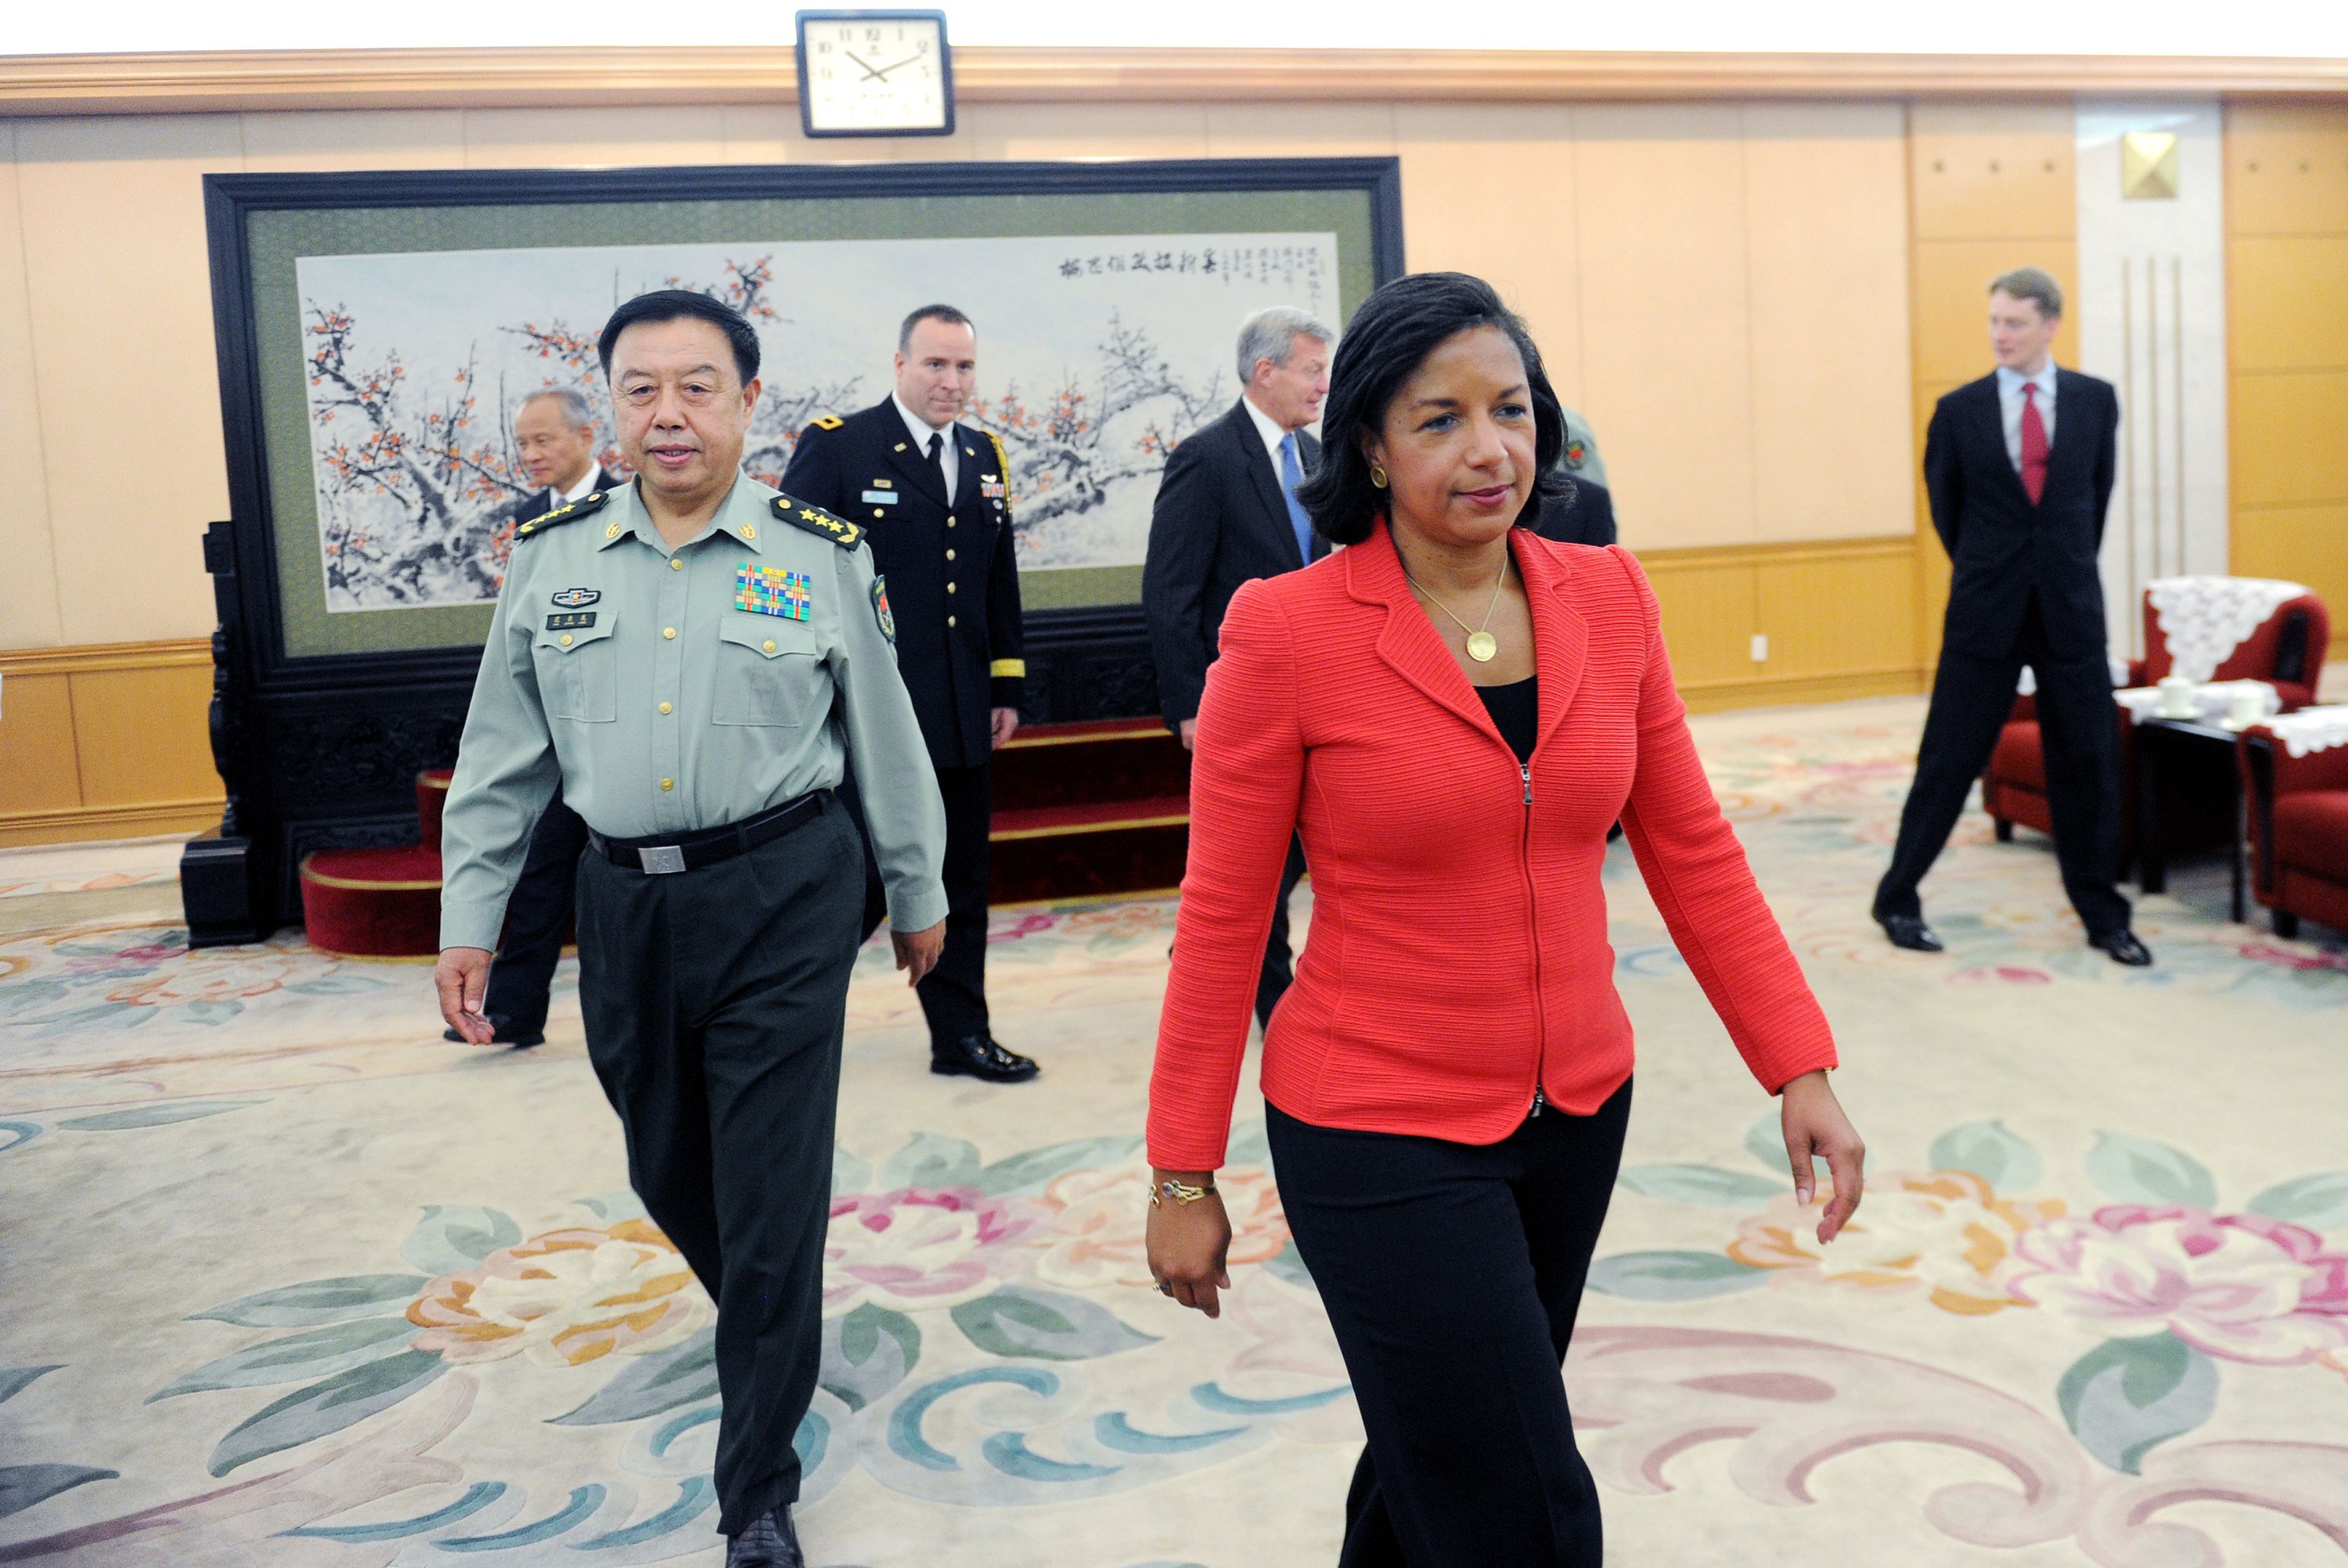 US National Security Adviser Susan Rice and General Fan Changlong, vice-chairman of the Central Military Commission, meeting in Beijing. Photo: Reuters